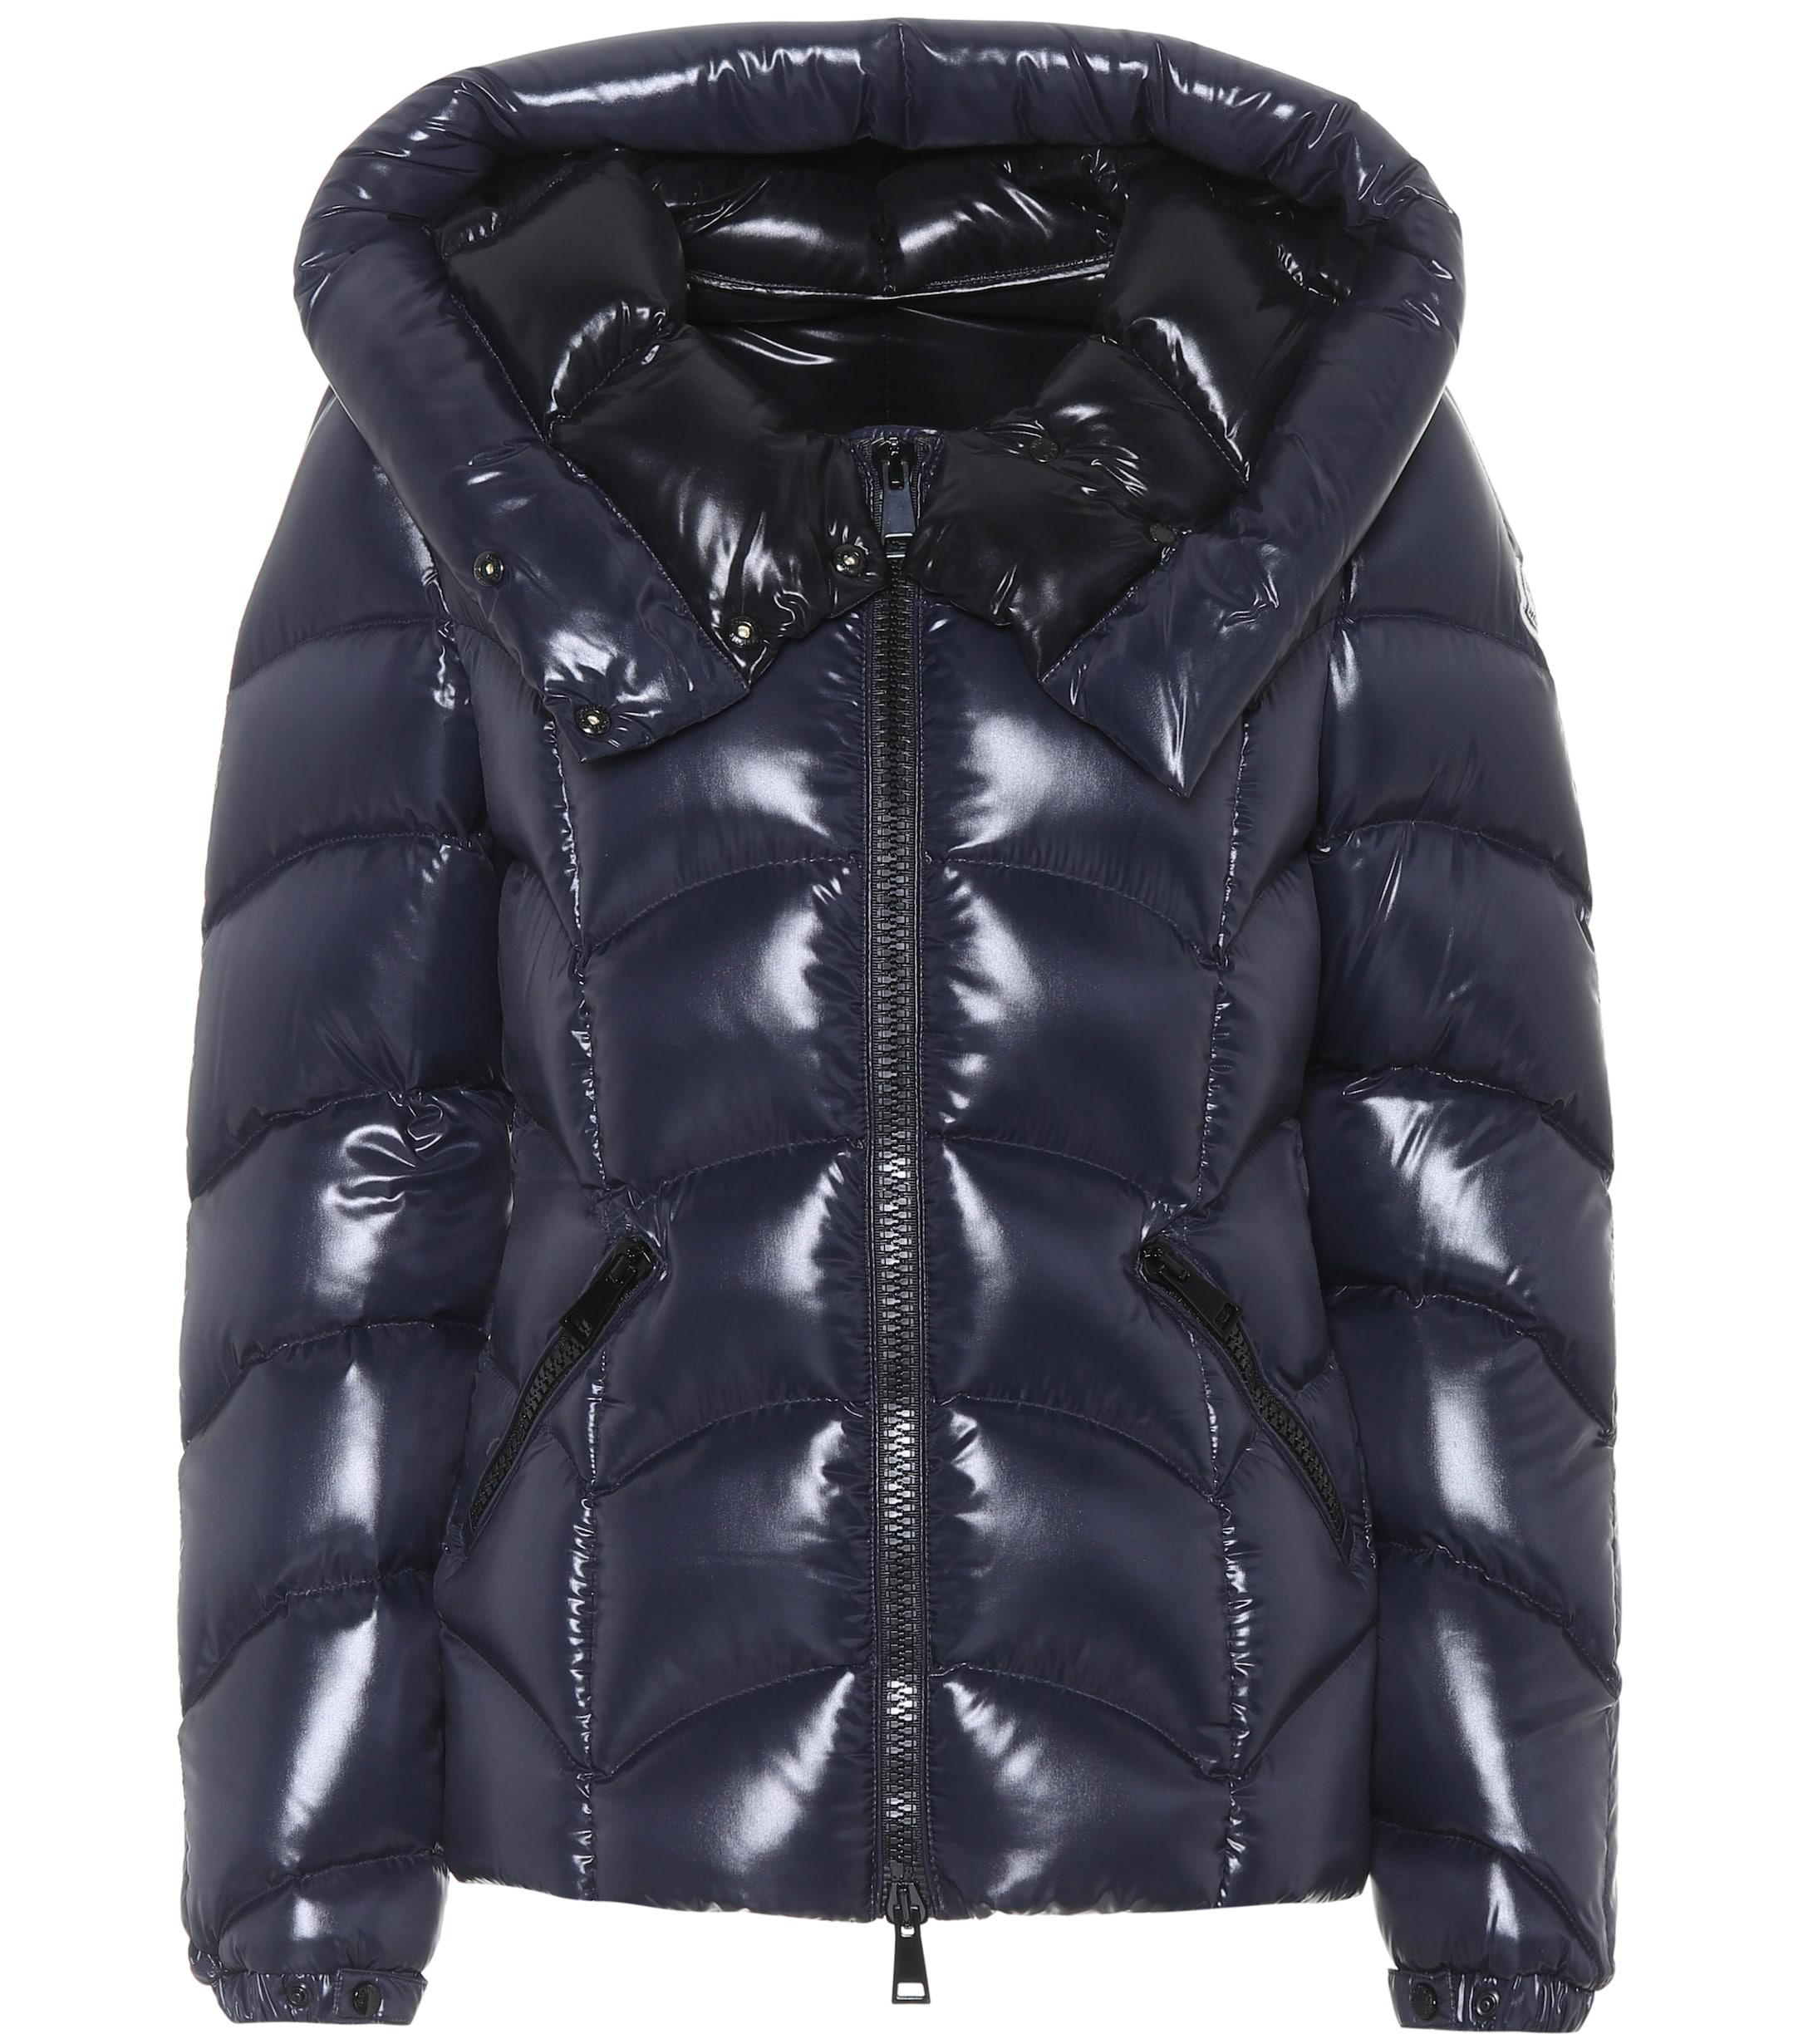 Moncler Akebia Shiny Puffer Jacket in Navy (Blue) - Lyst